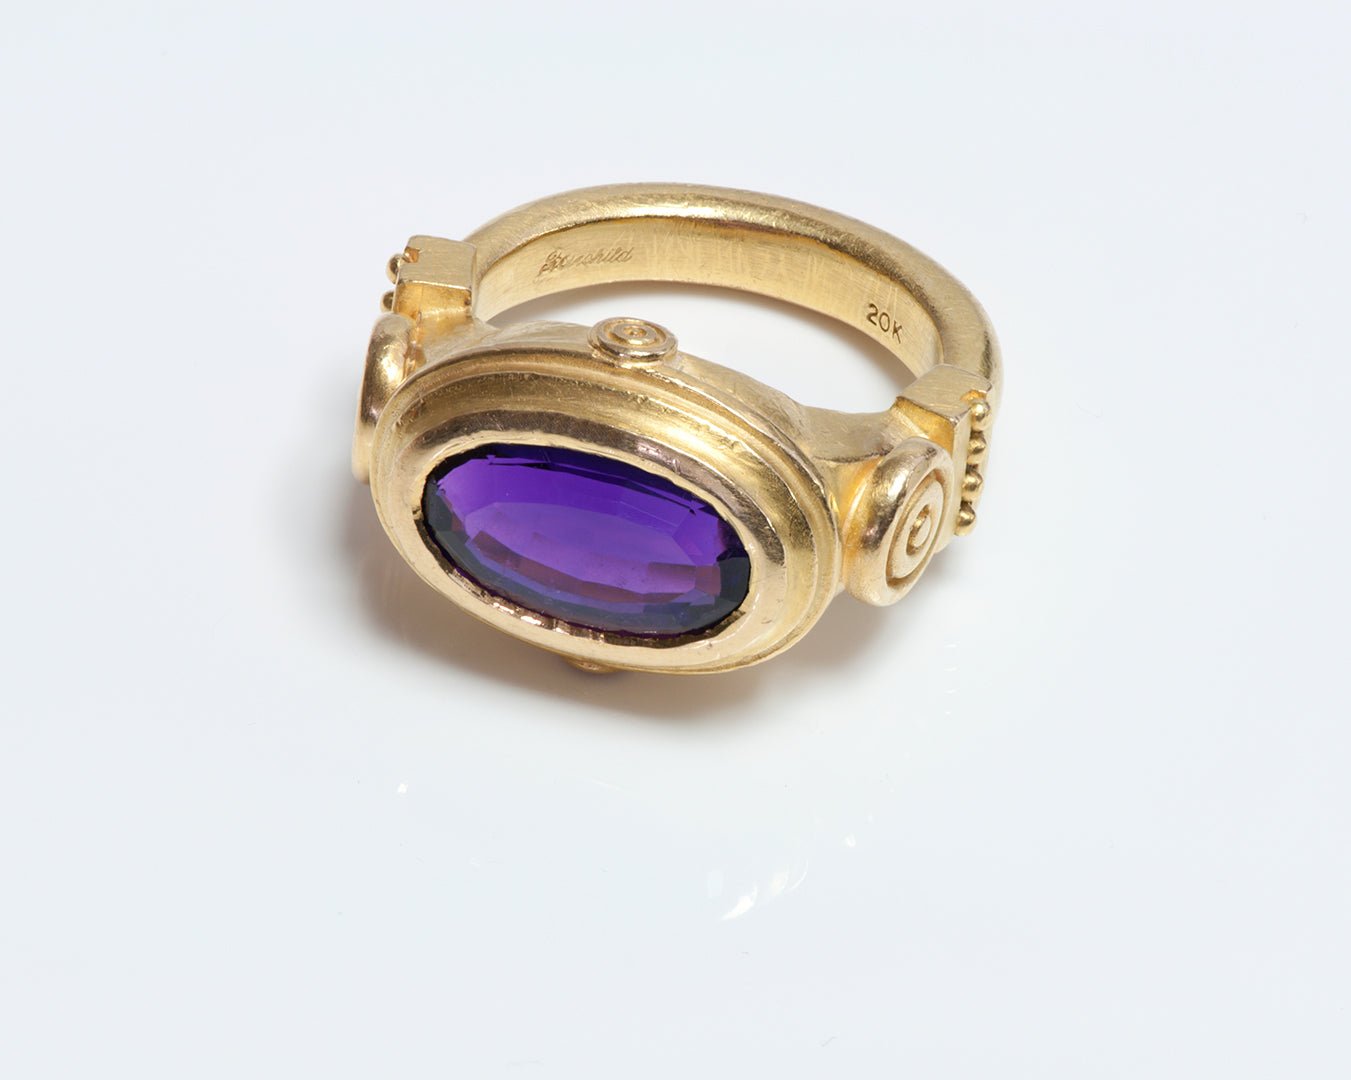 Fairchild & Co. 20K Yellow Gold Amethyst Ring - DSF Antique Jewelry